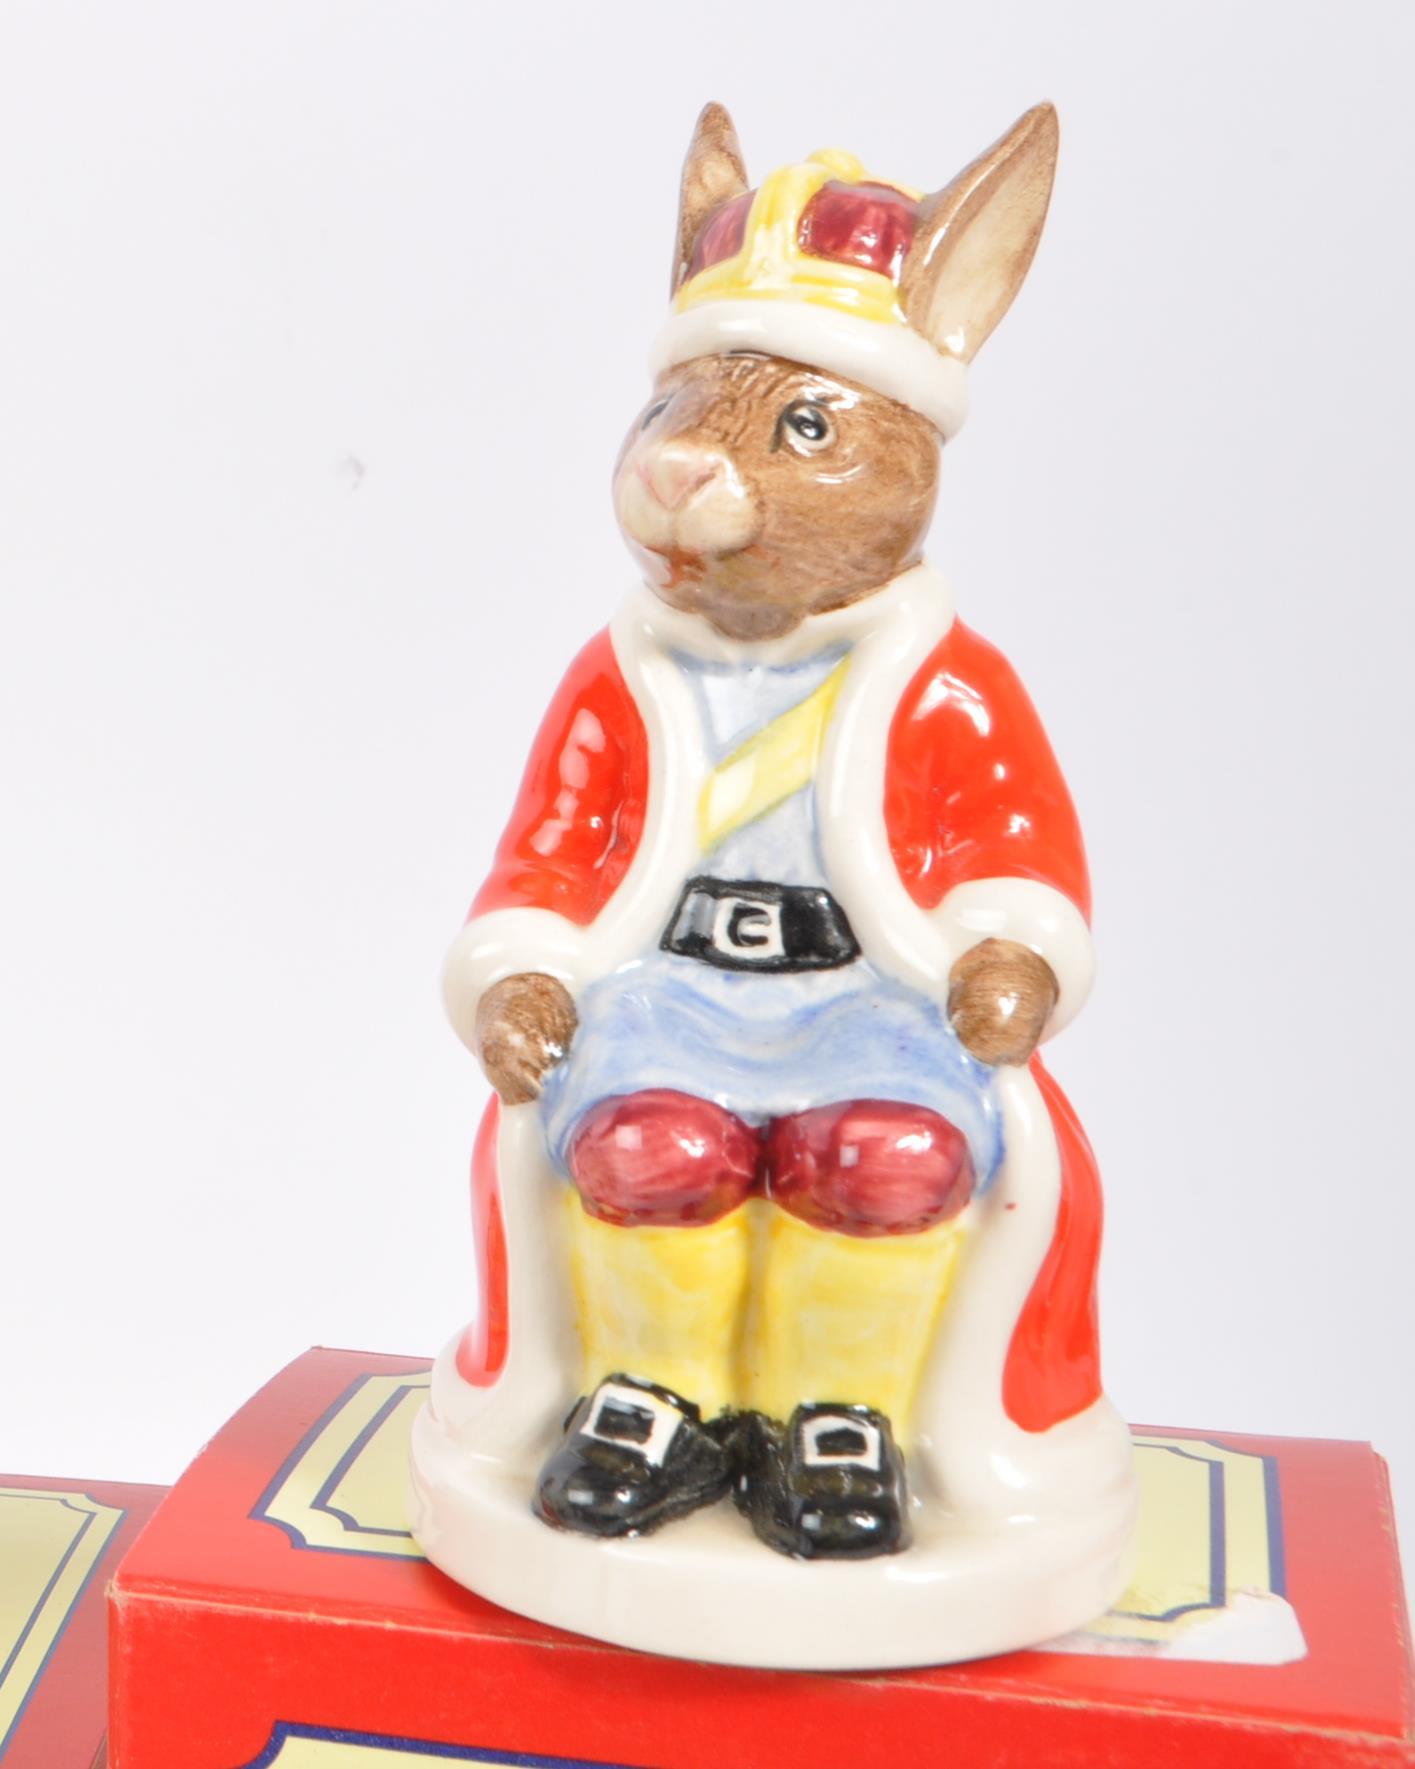 ROYAL DOULTON - BUNNYKINS - COLLECTION OF PORCELAIN FIGURES - Image 5 of 7